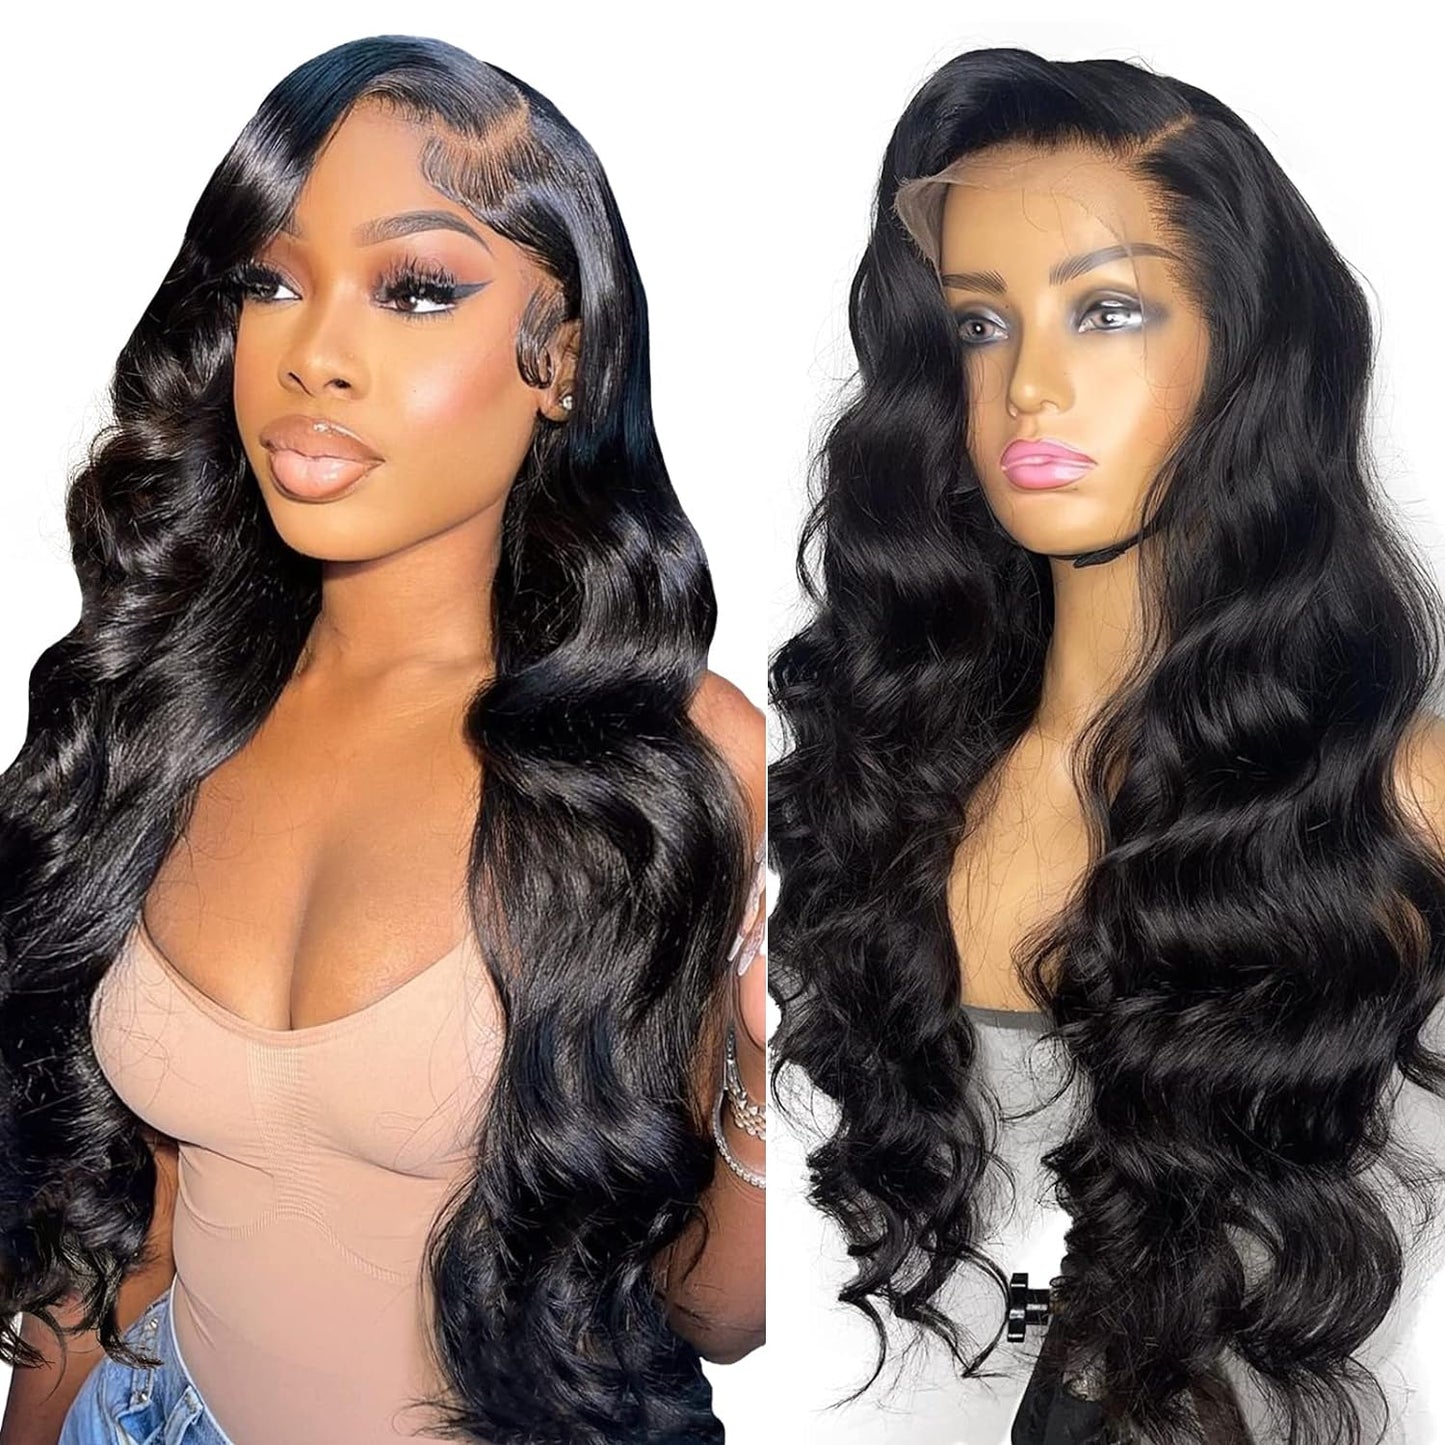 Beluck 13x6 Lace Front Wigs Human Hair 200 Density, HD Transparent Pre Plucked, Glueless Body Wave Frontal With Baby Hair, Bleached Knots, Natural Color